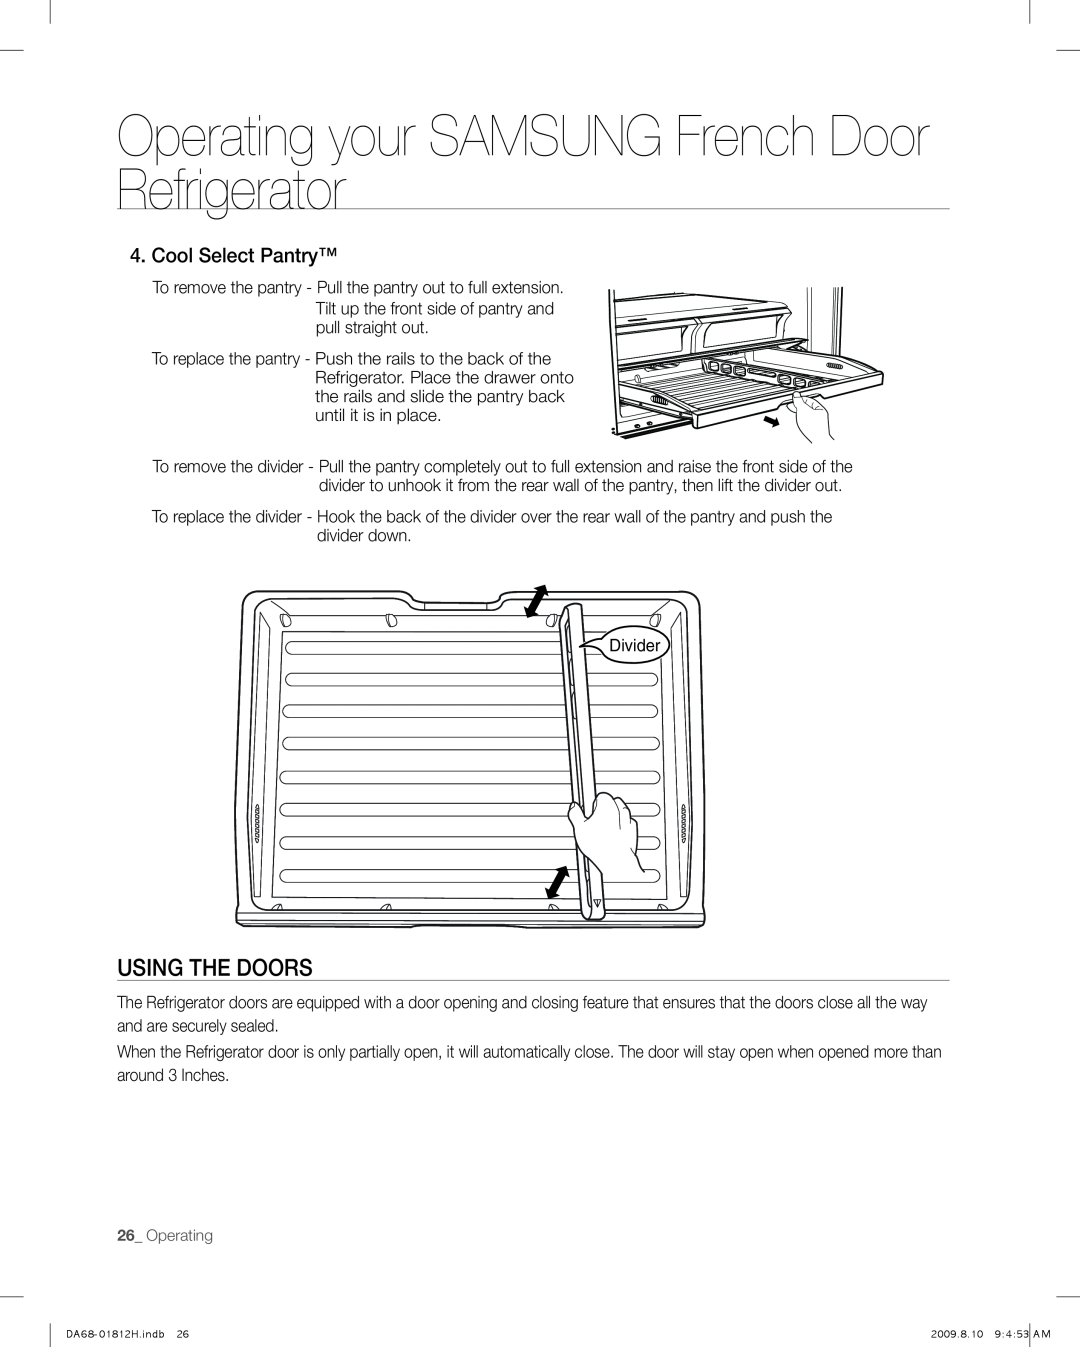 Samsung RF263 user manual Using The Doors, Operating your SAMSUNG French Door Refrigerator, Cool Select Pantry 